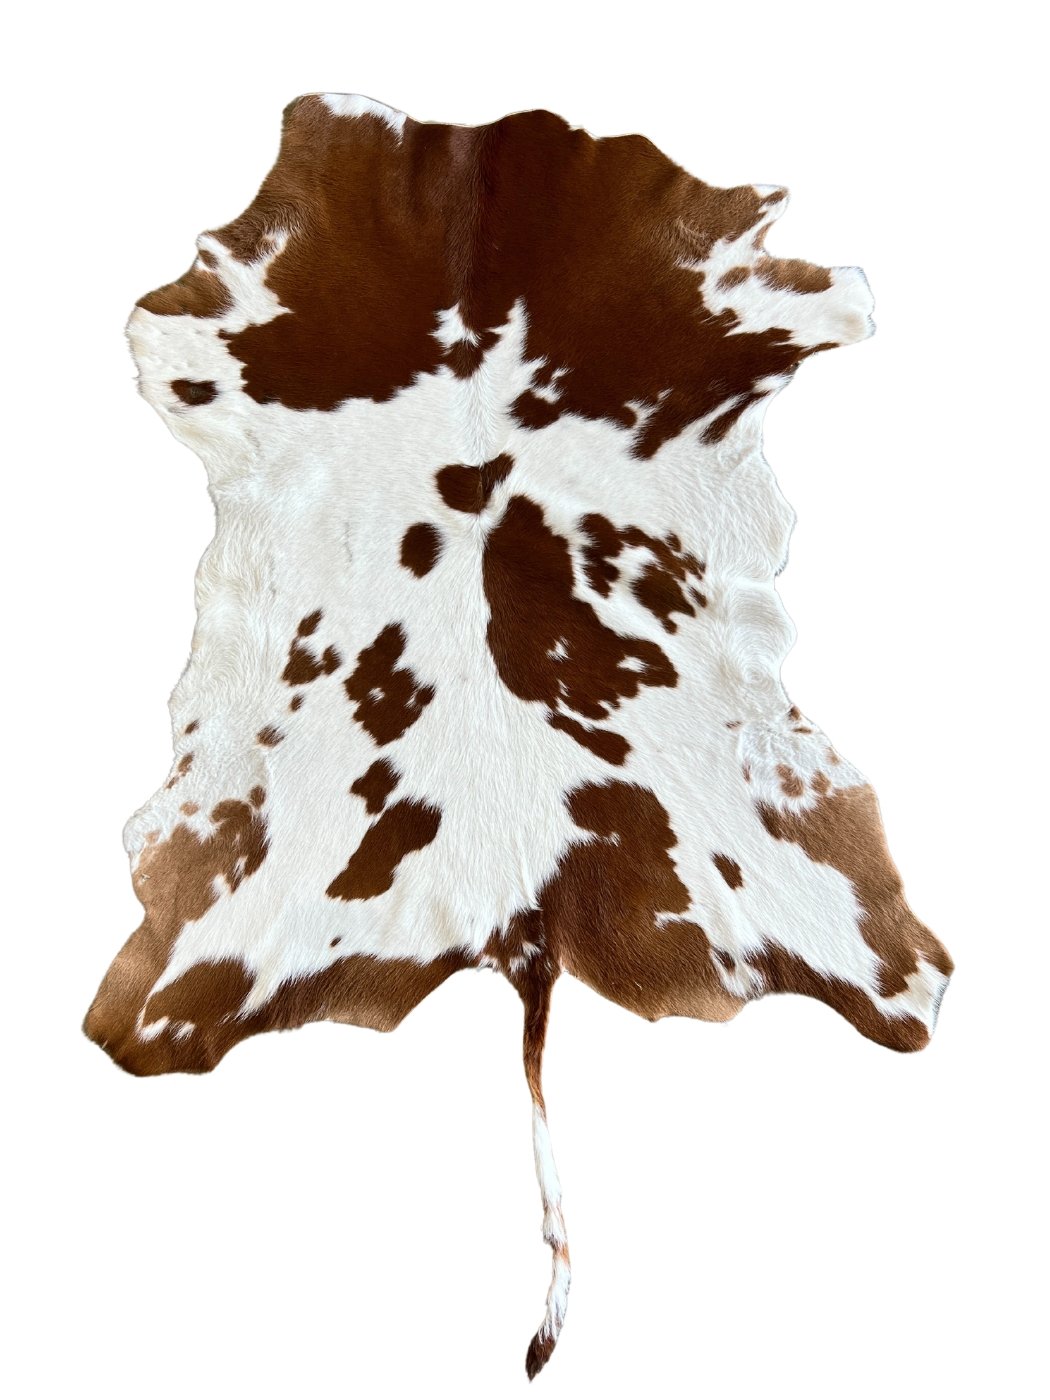 Calf Hide - Brown and White with Tail - Hides & Leather Store - By Trahide - Calf Hide